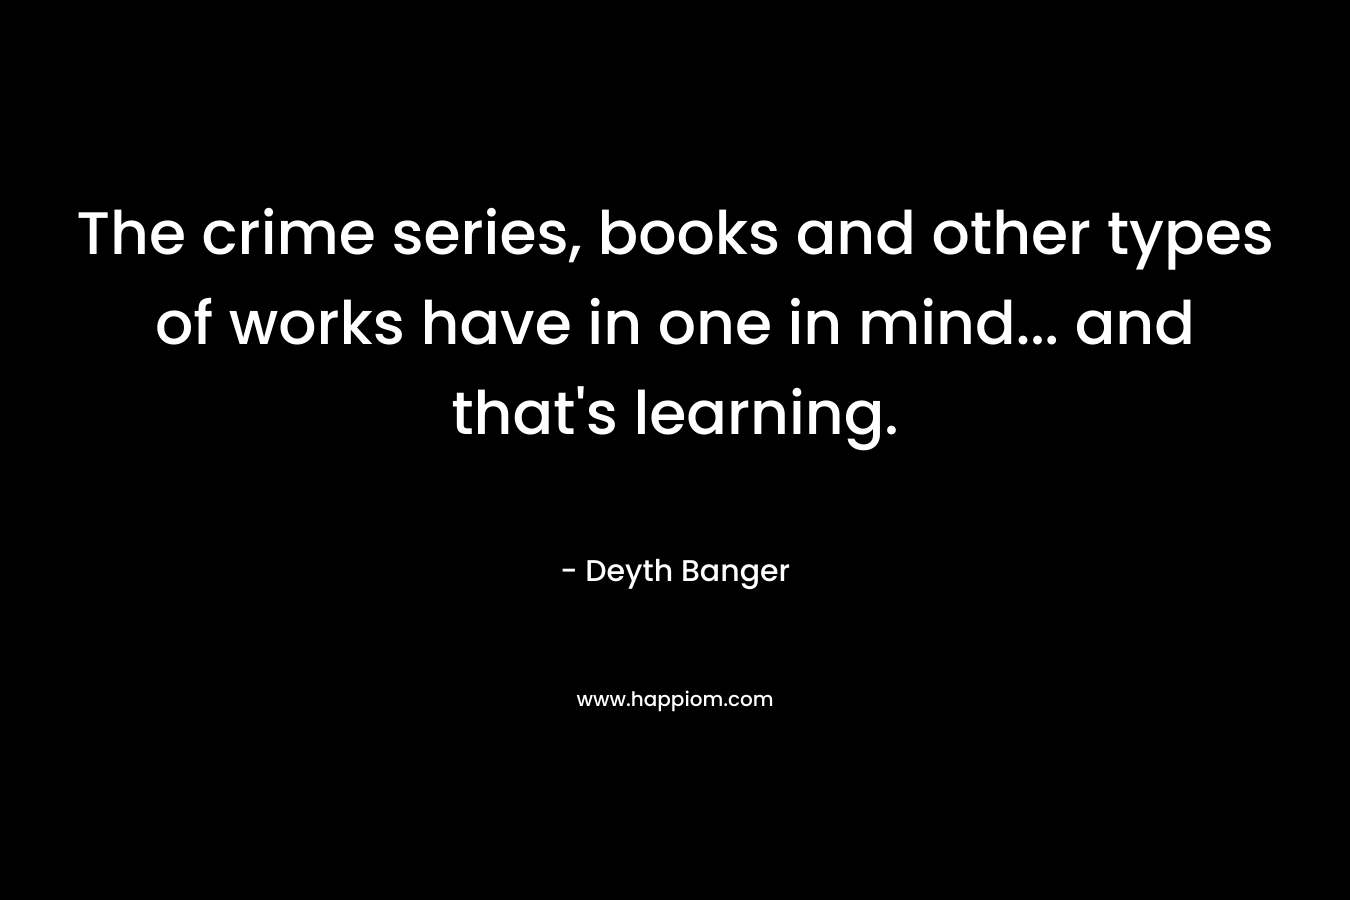 The crime series, books and other types of works have in one in mind… and that’s learning. – Deyth Banger